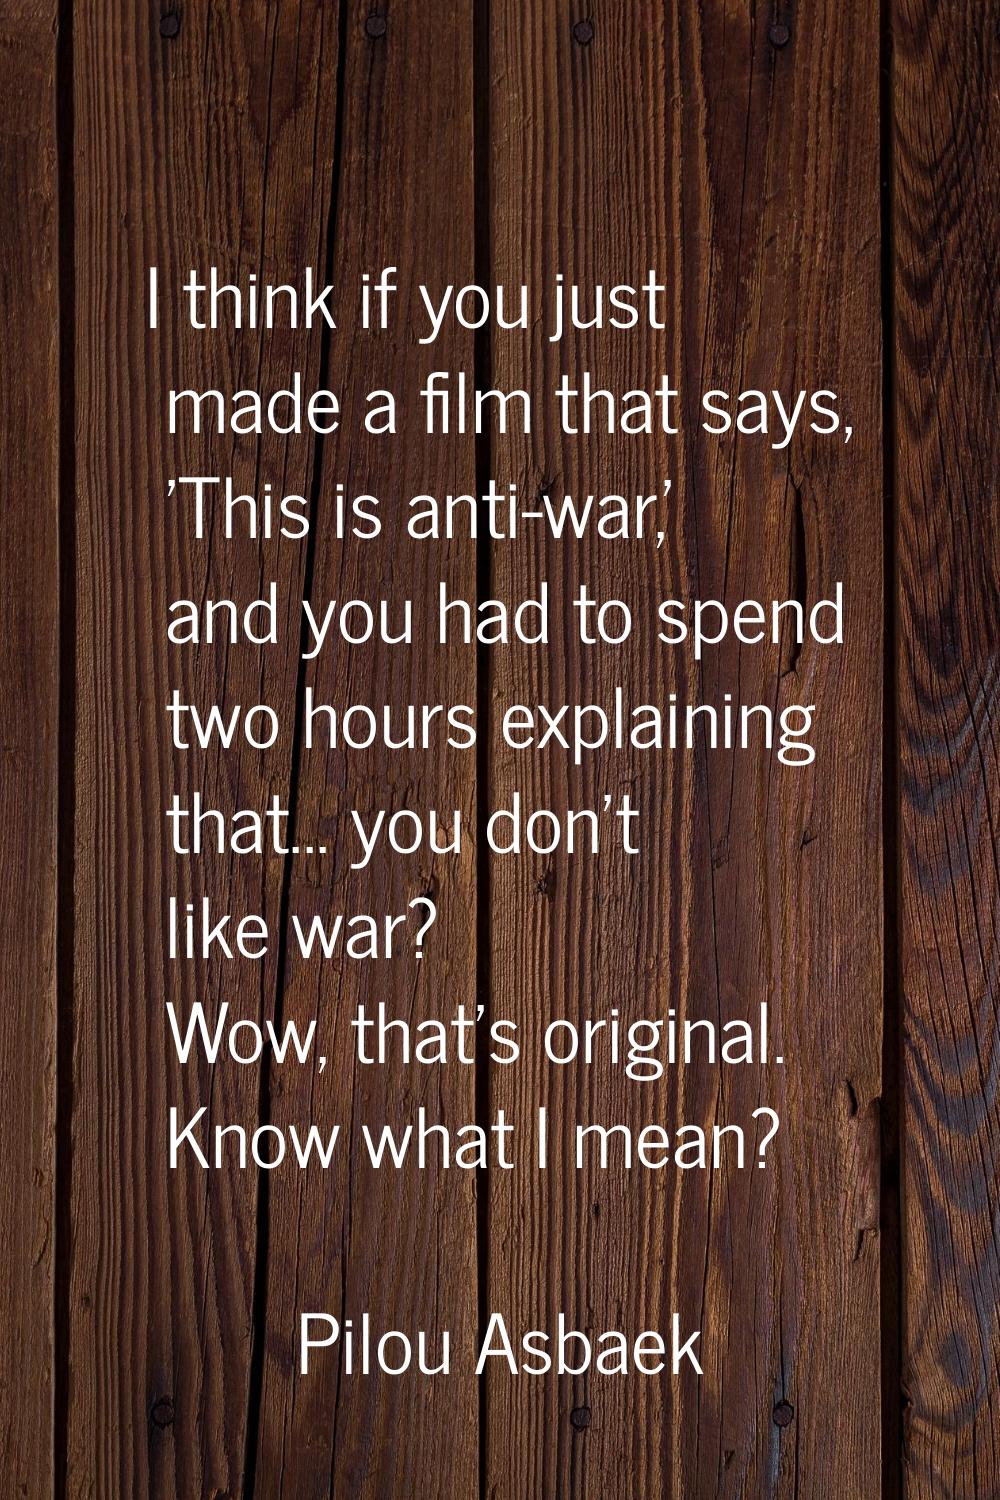 I think if you just made a film that says, 'This is anti-war,' and you had to spend two hours expla